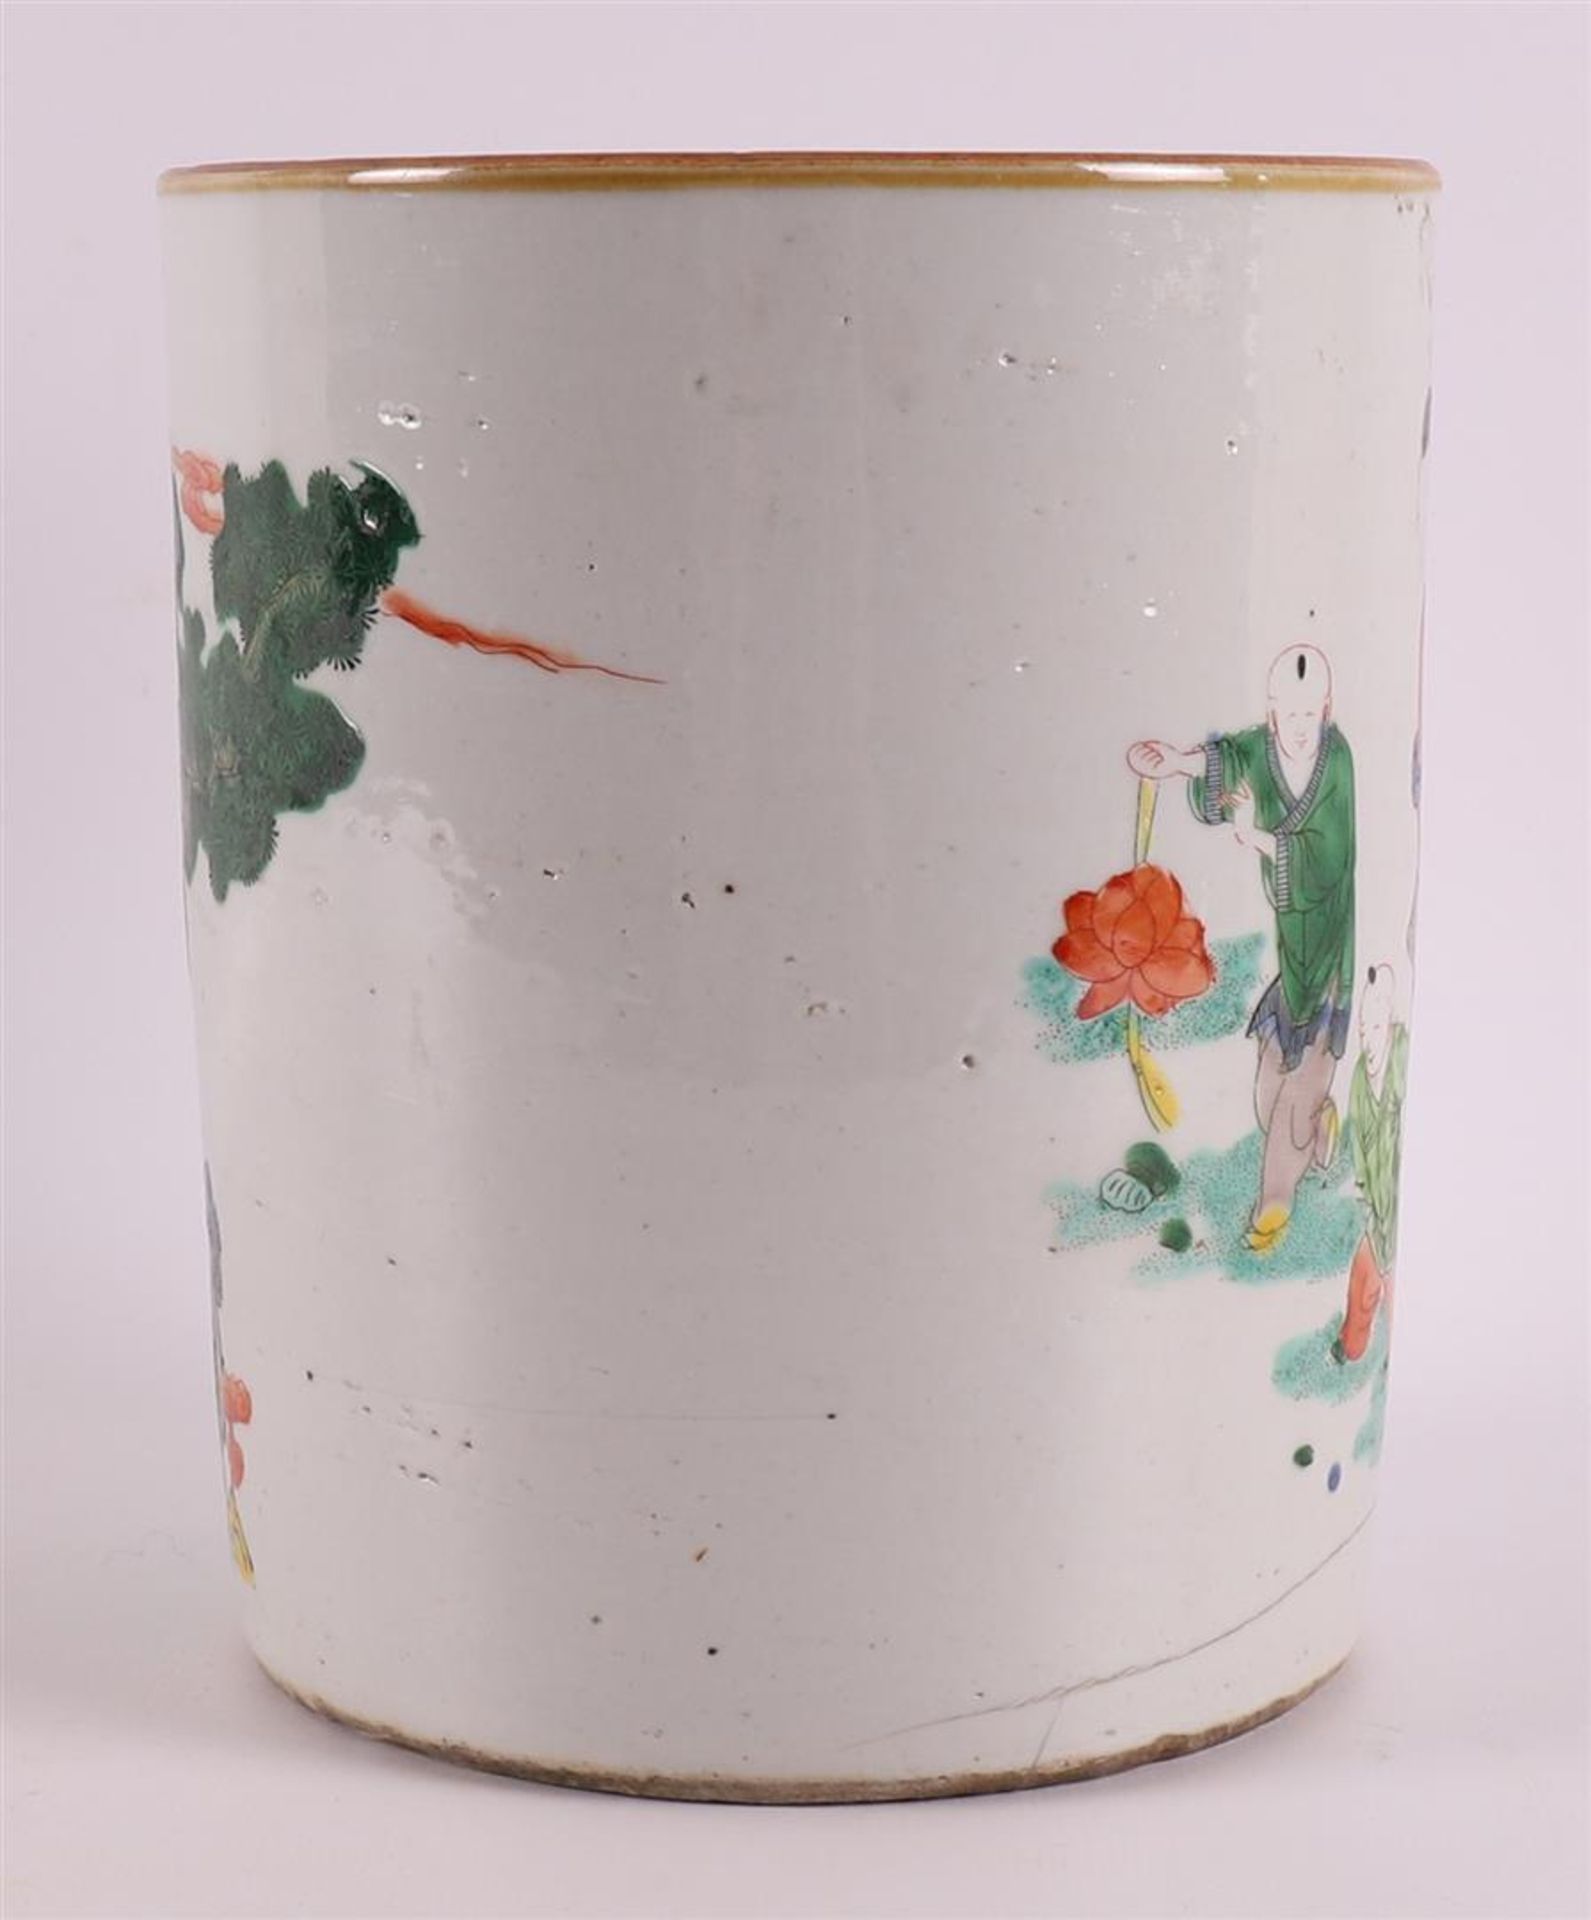 A cylindrical porcelain famille verte brush pot, China, late 19th century - Image 4 of 8